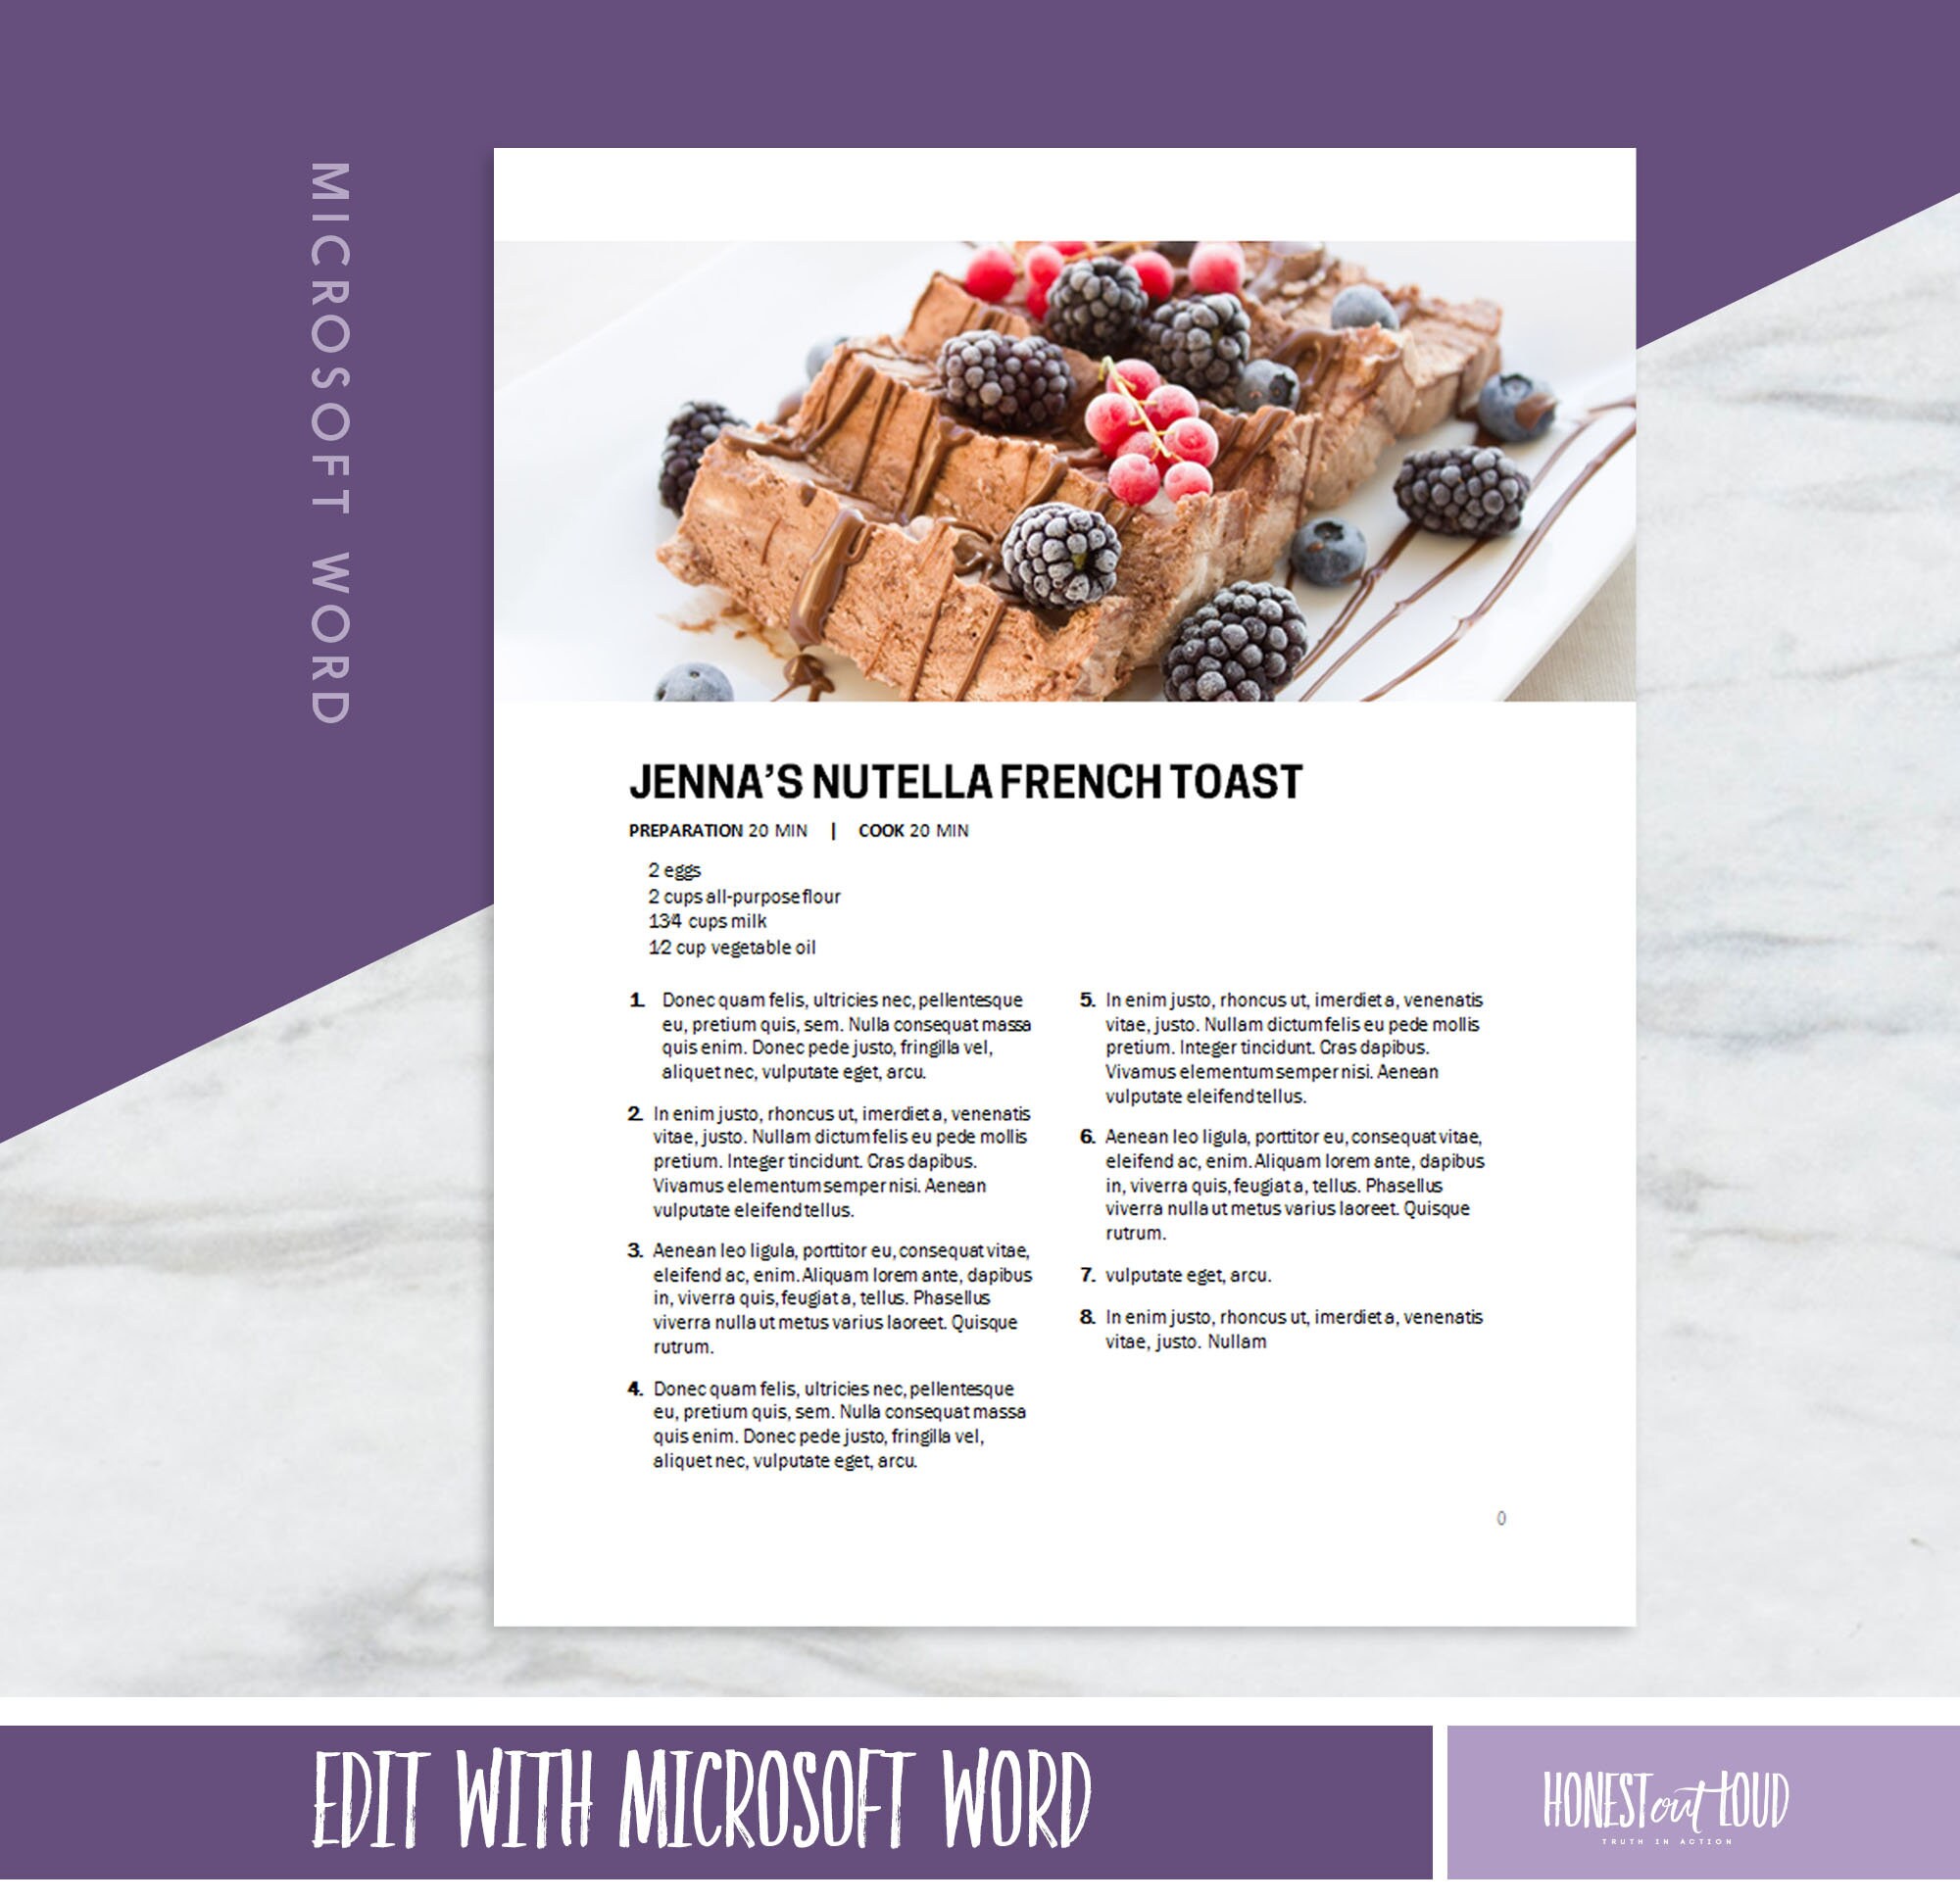 Top 8 Free Cookbook Templates - Word, Google Docs, InDesign to Make Your  Own Recipe Book Online - FlipHTML5